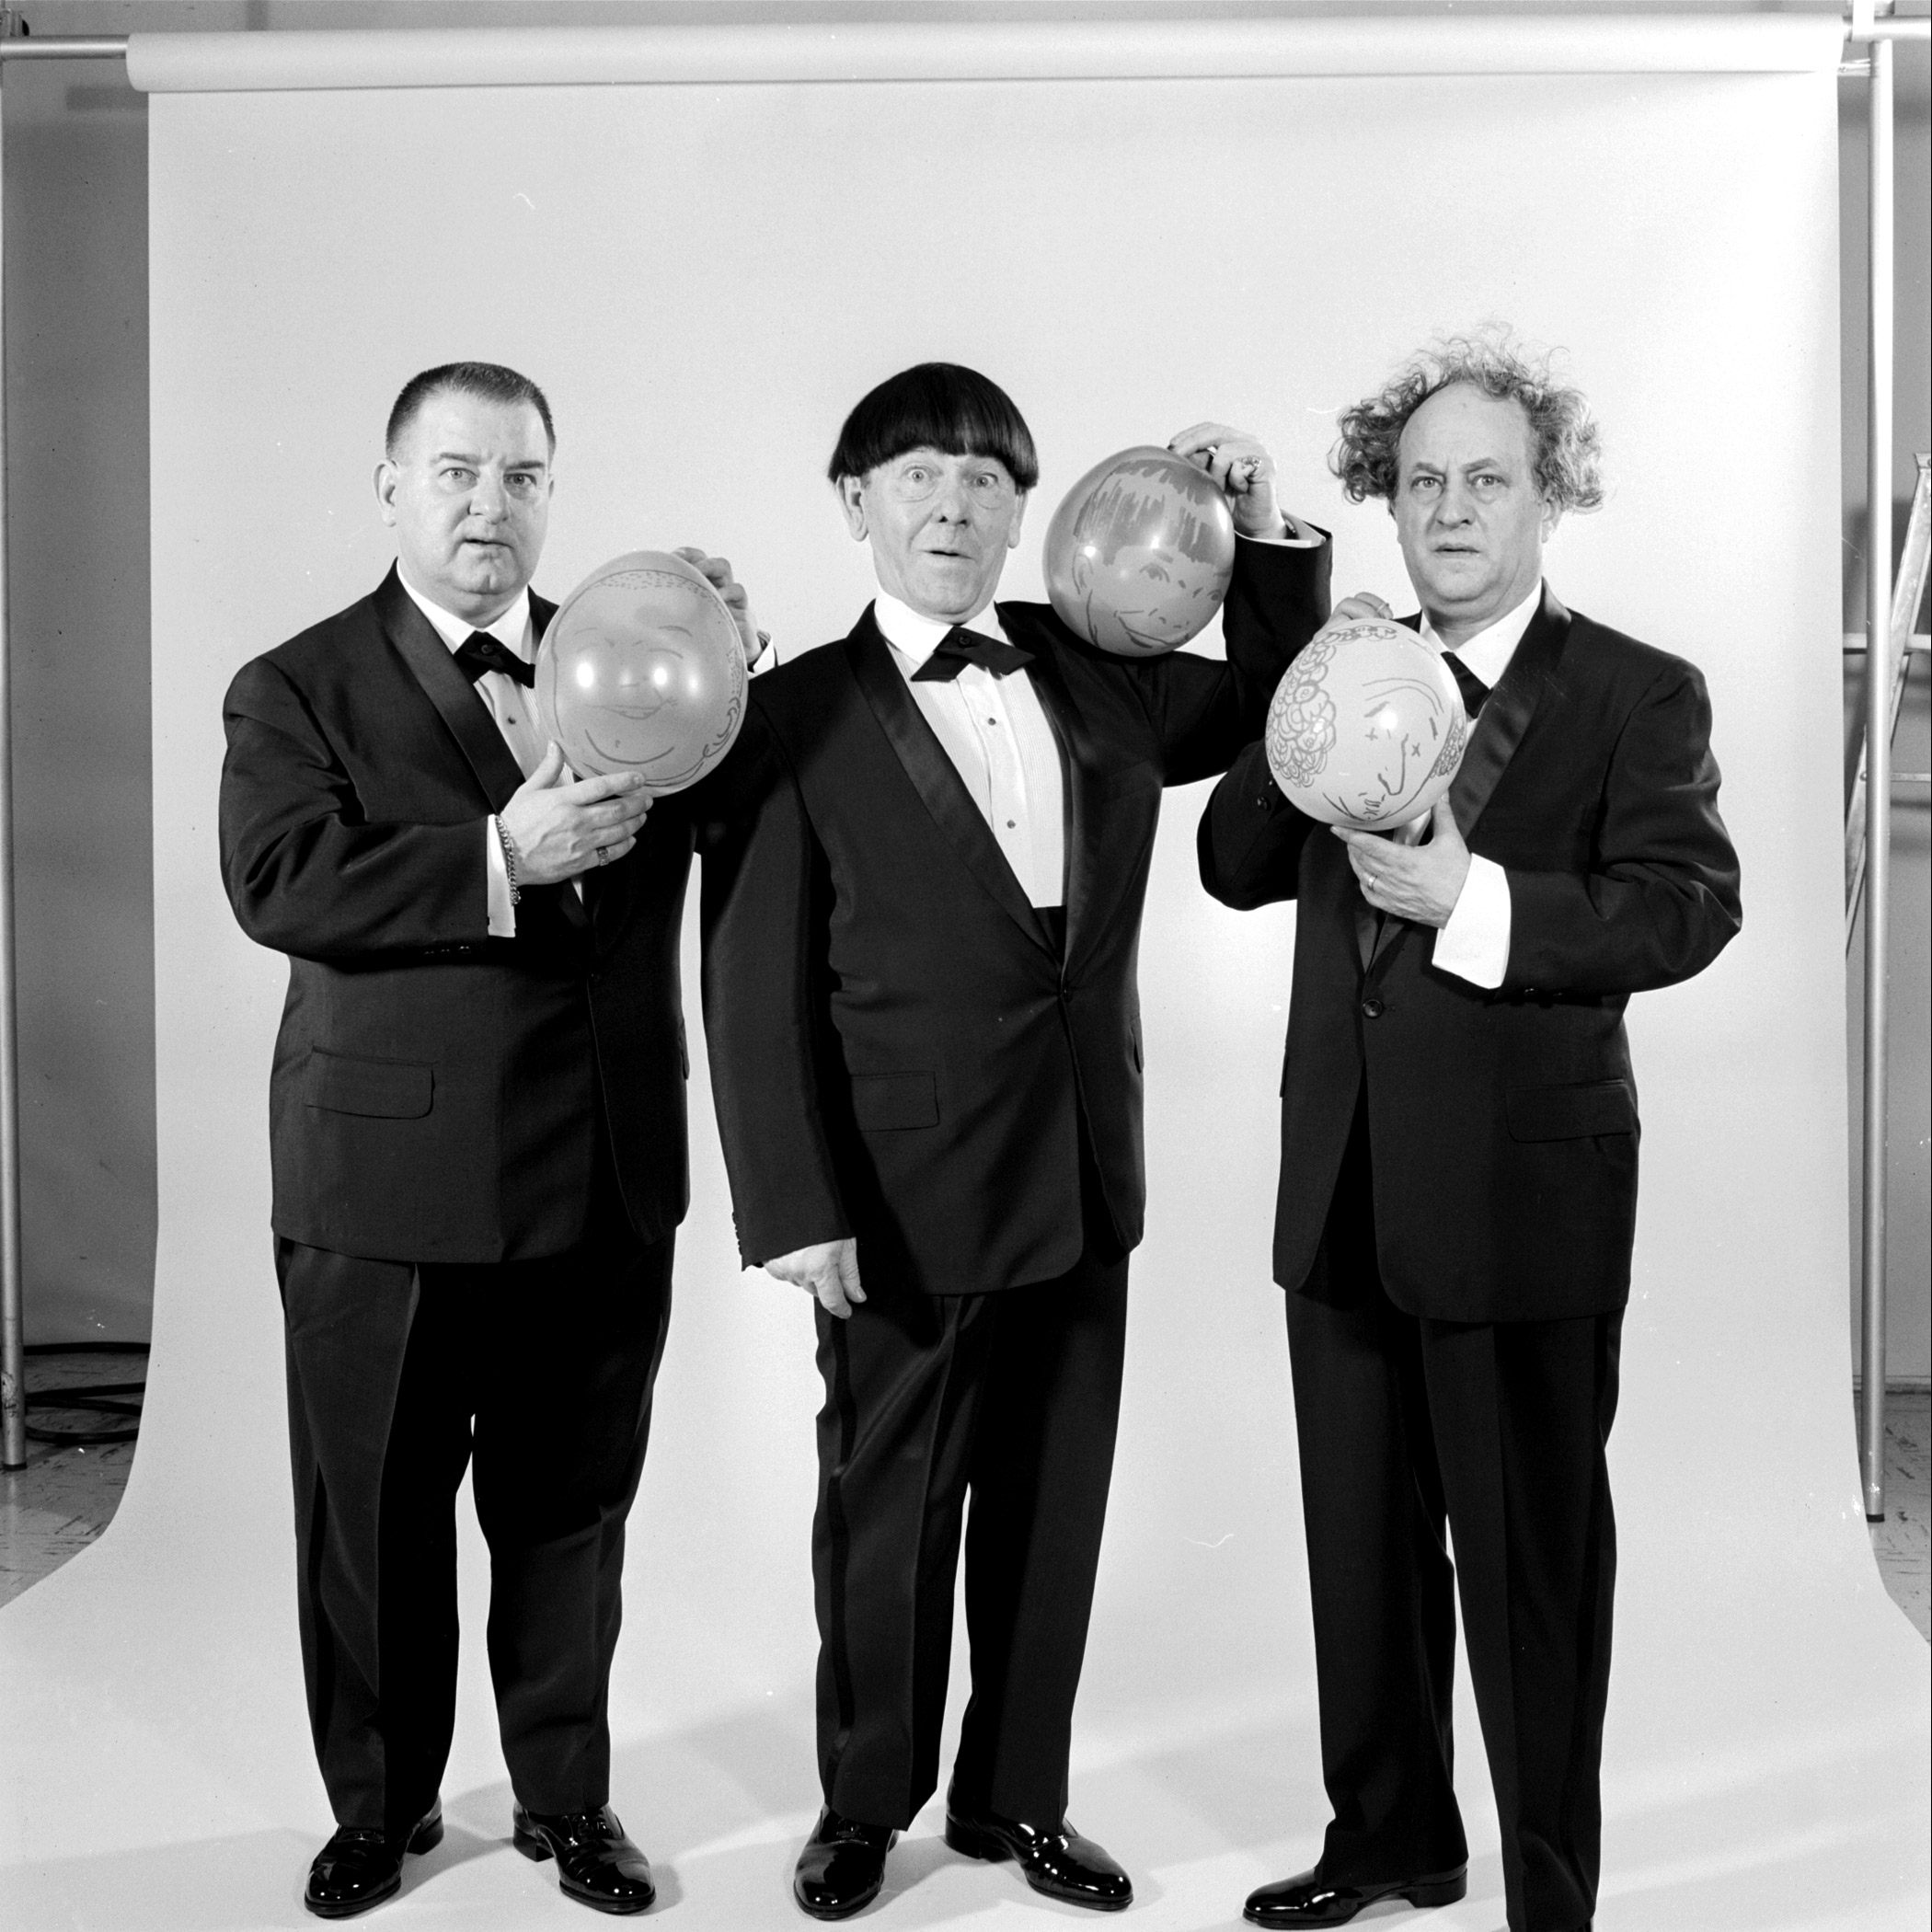 Three Stooges holding balloons in May 1959.